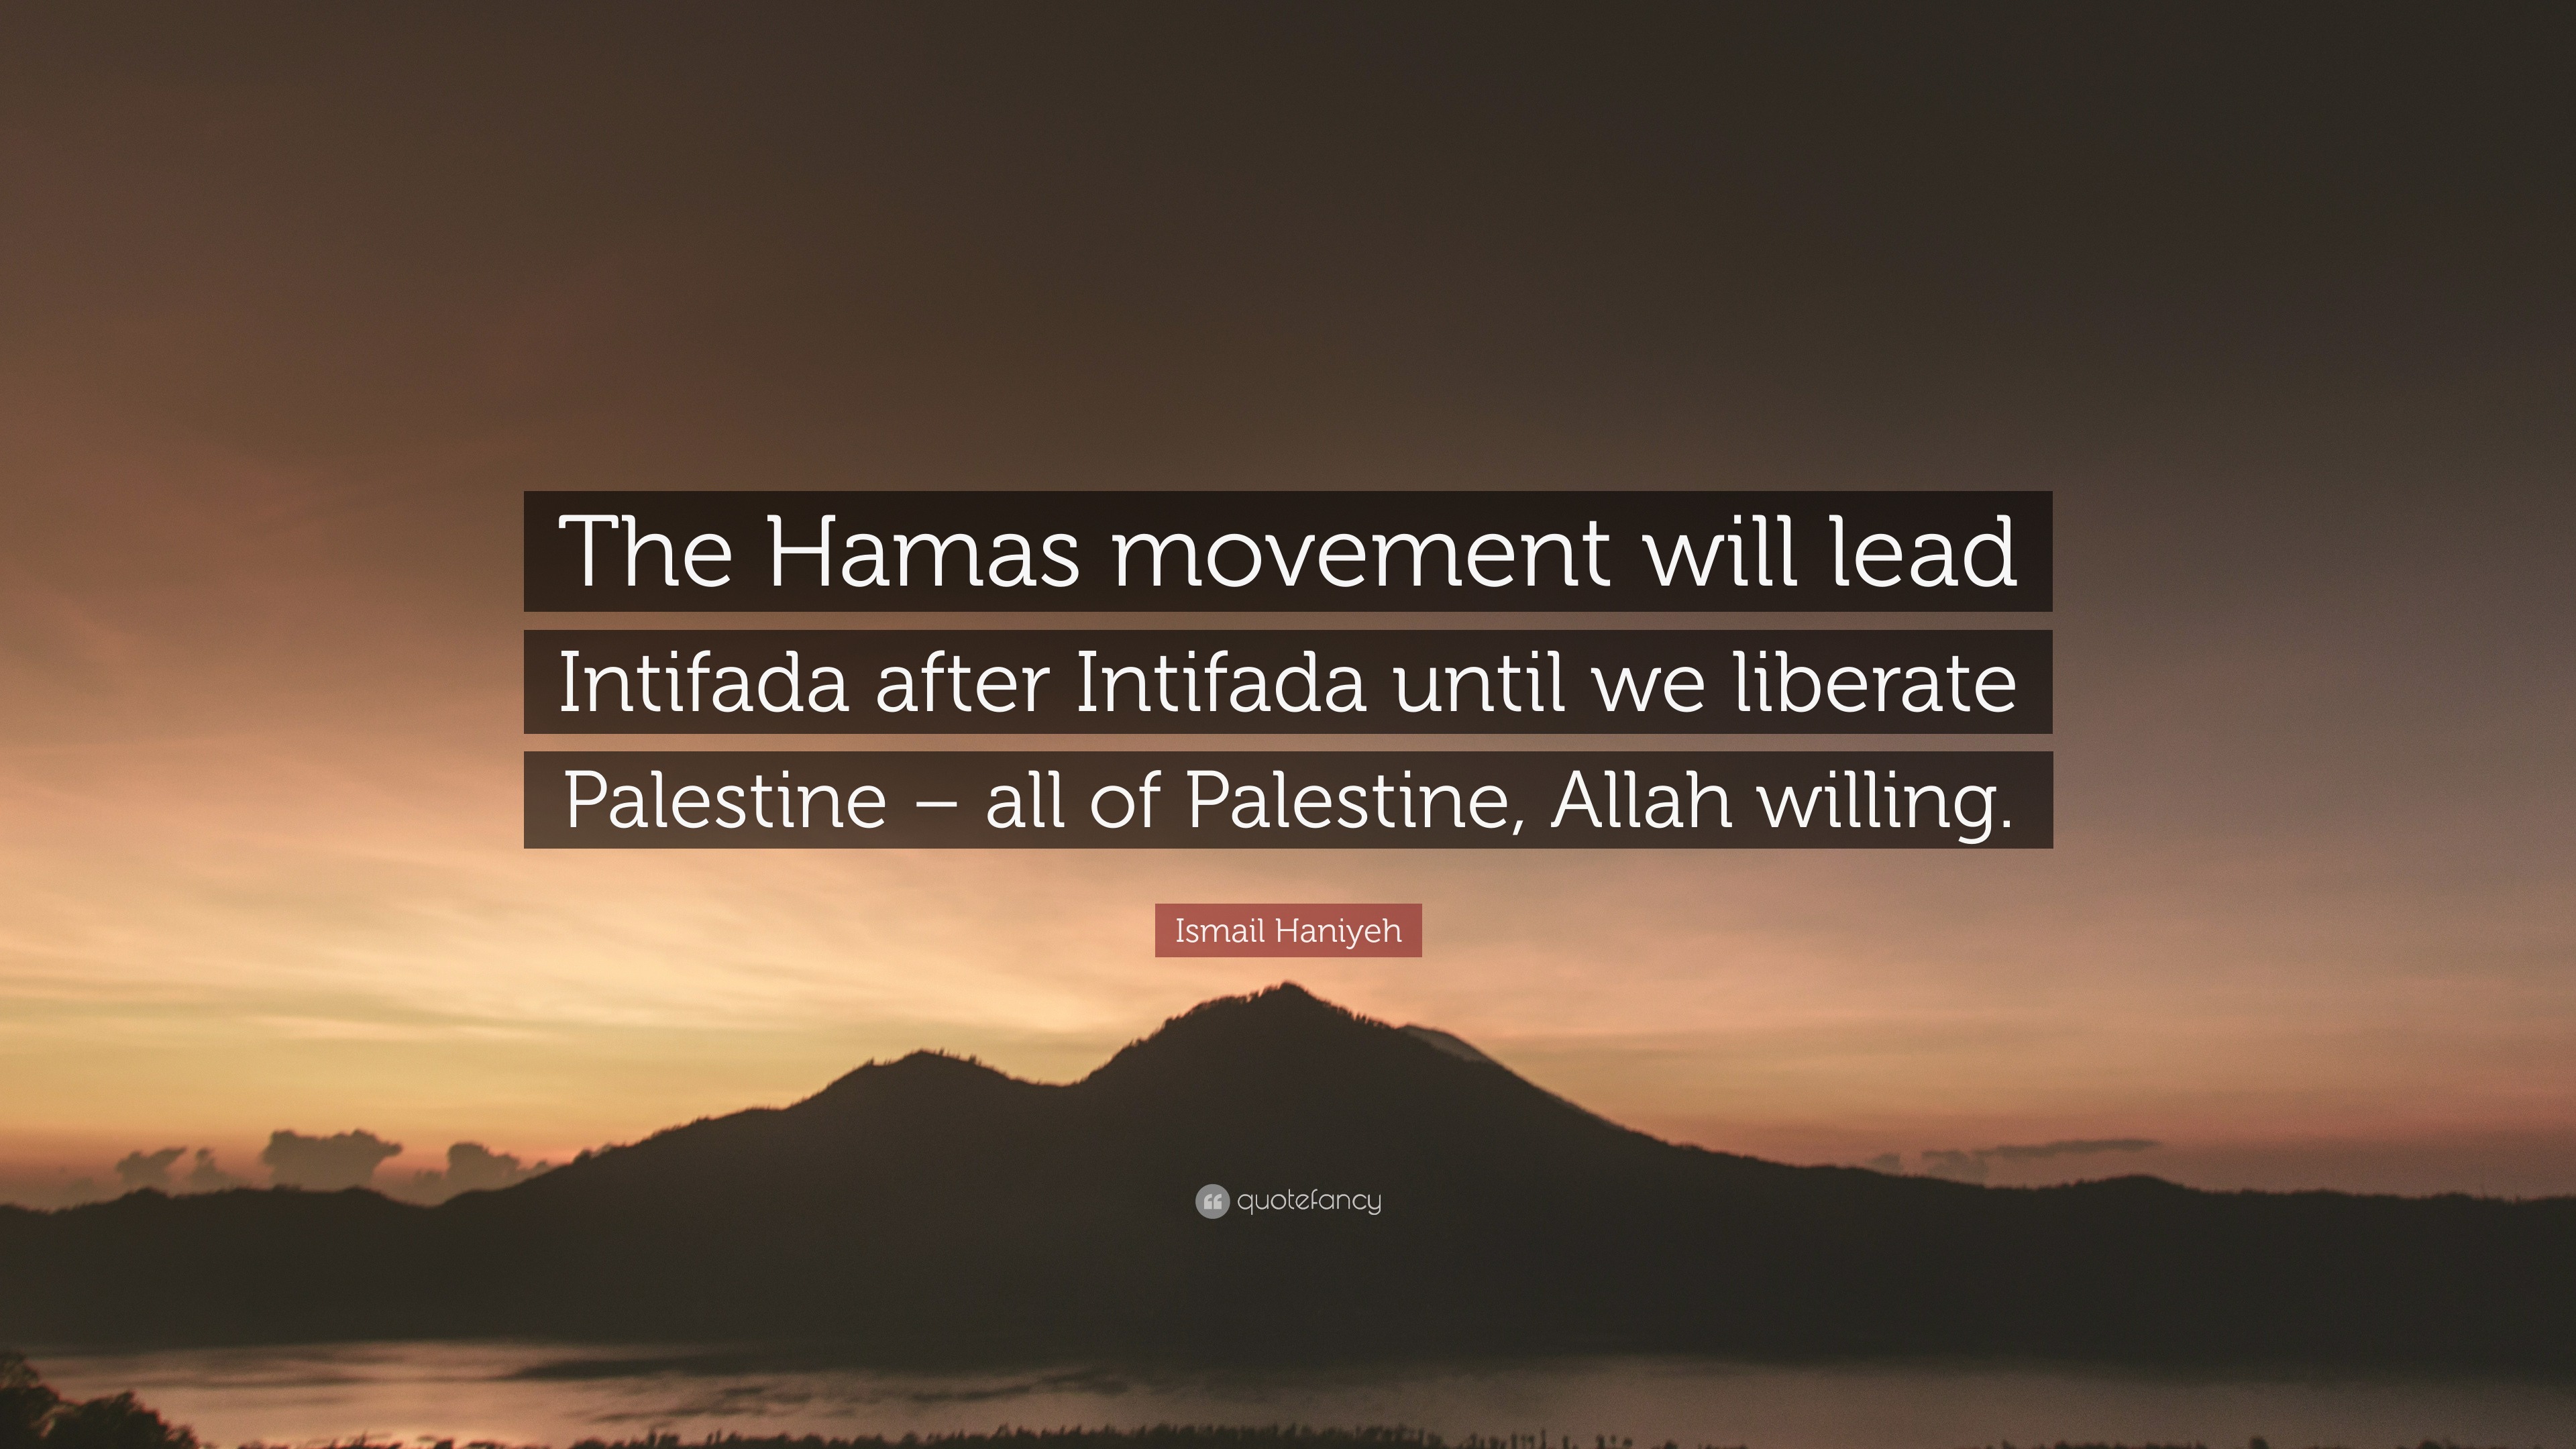 Ismail Haniyeh Quote “The Hamas movement will lead Intifada after